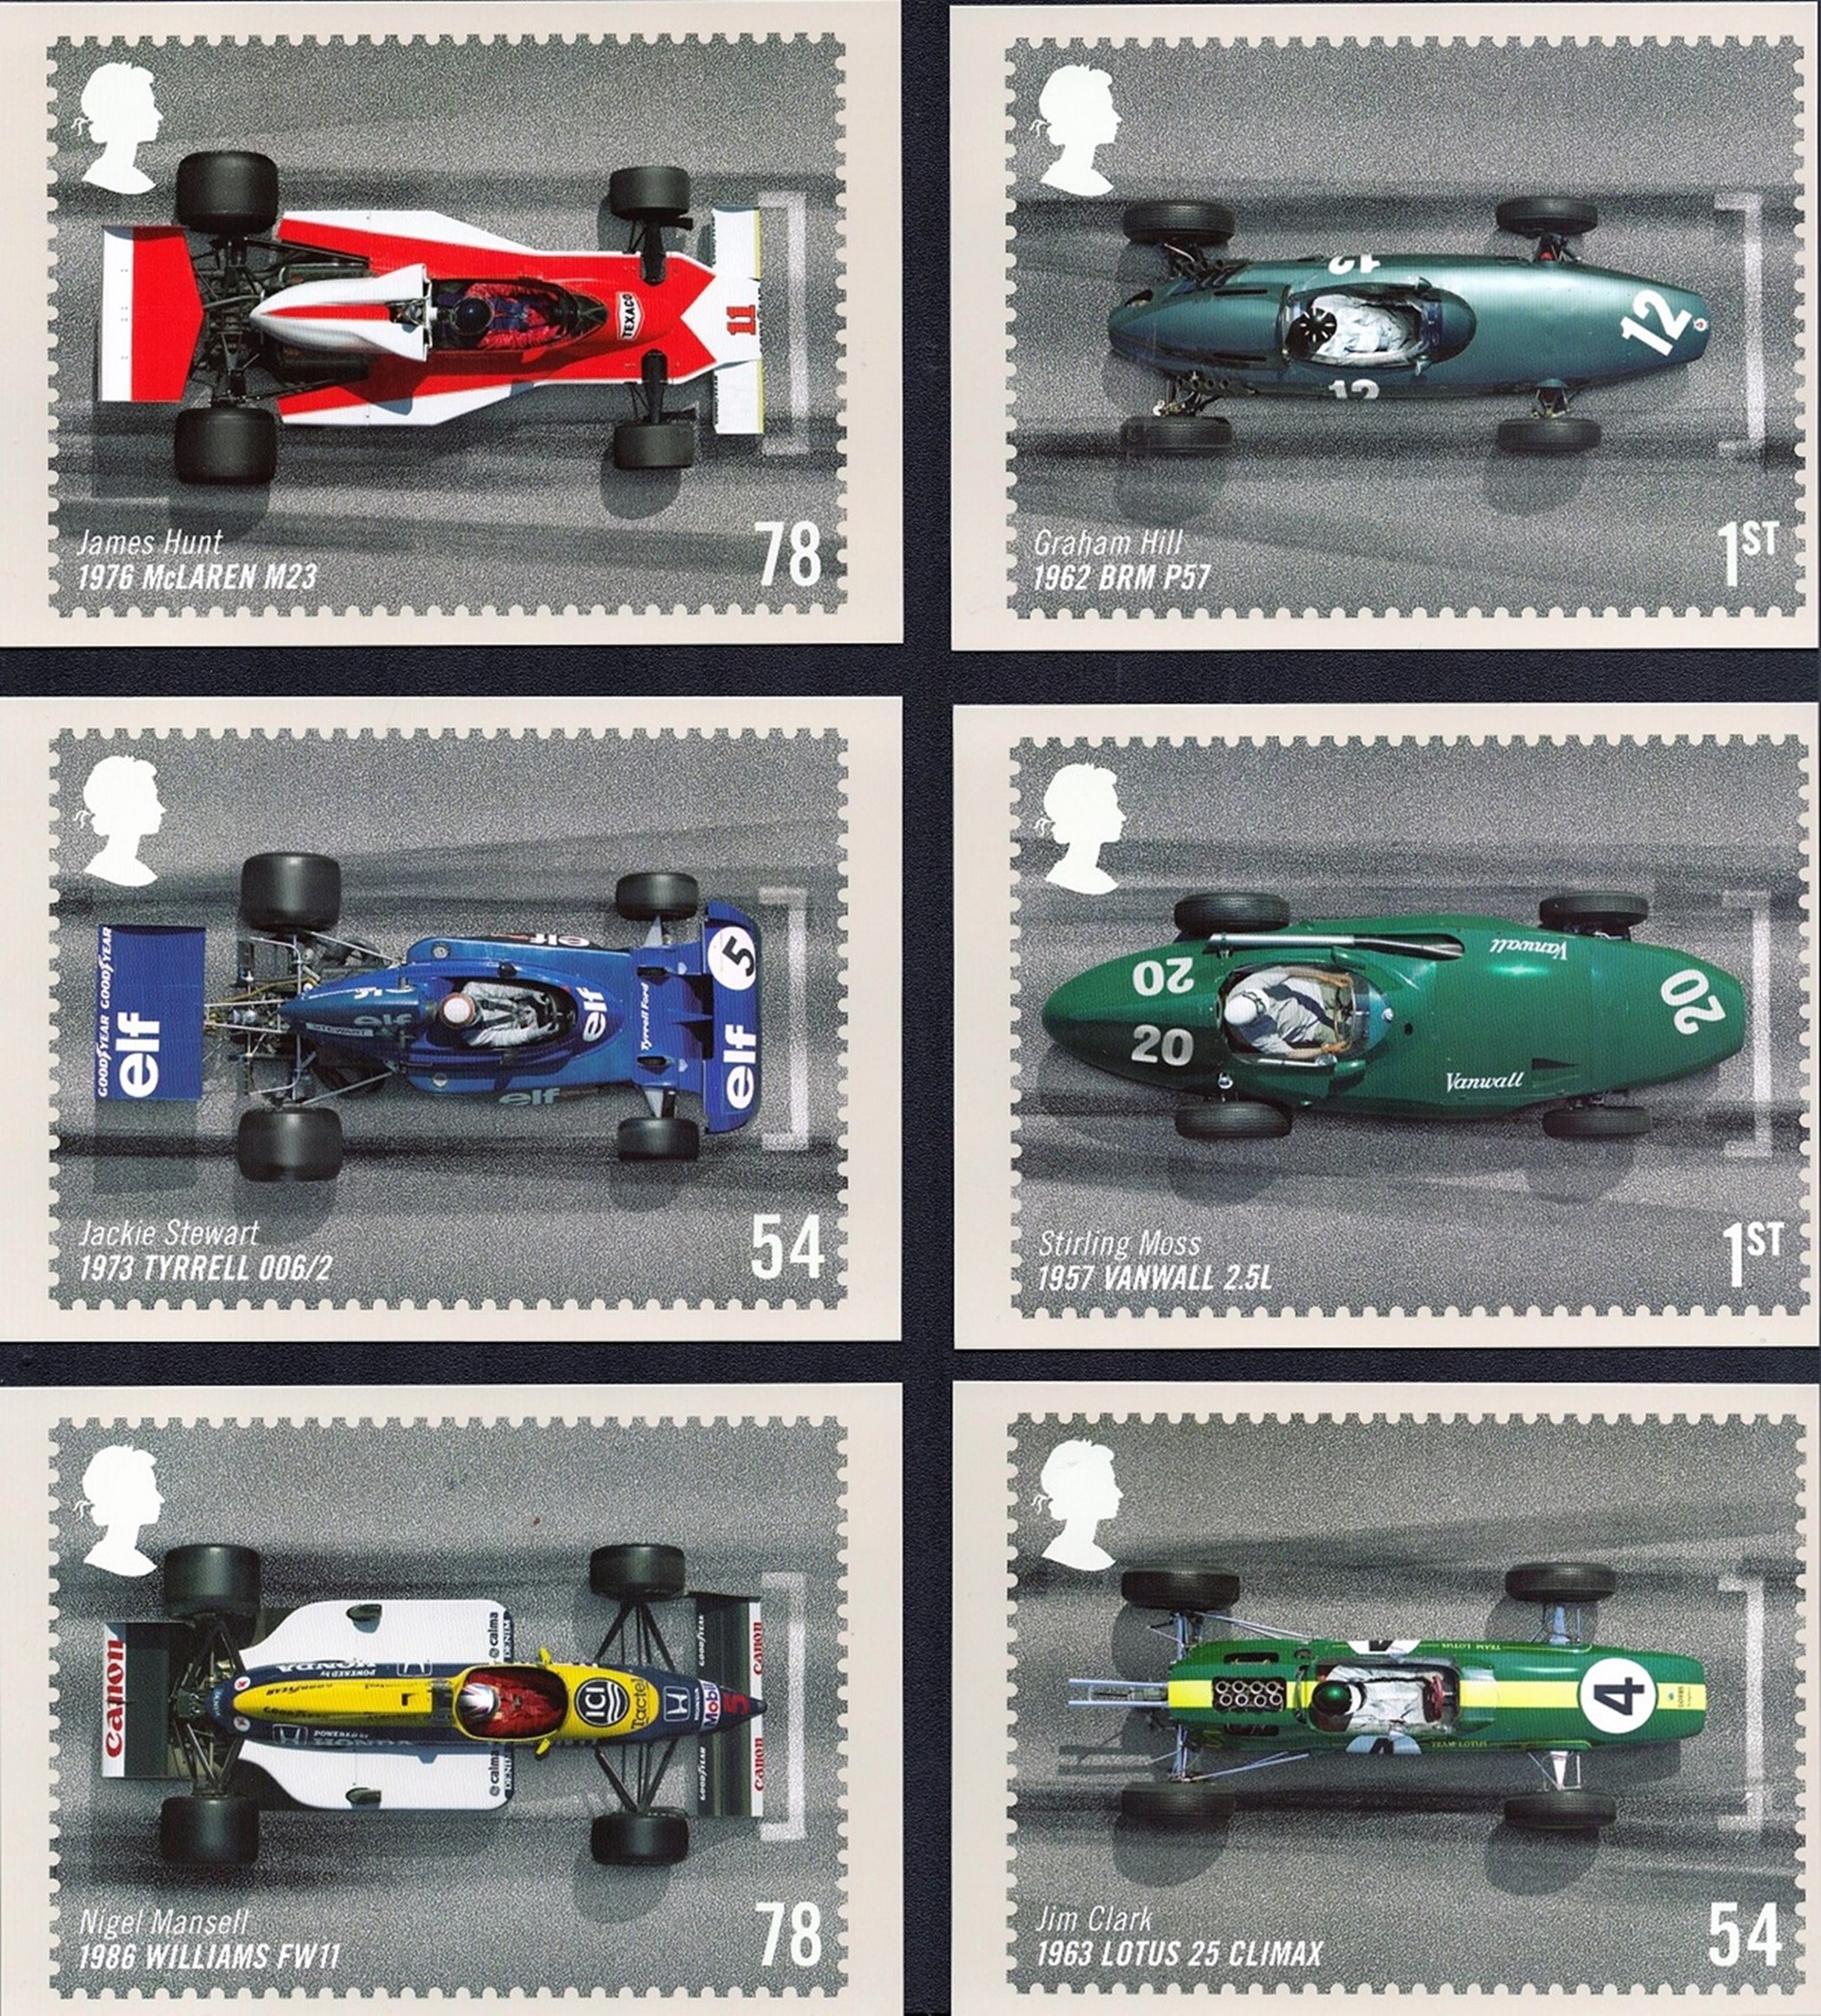 Grand Prix PHQ collection, featuring 6 PHQ cards showcasing a variety of Grand Prix stamps including